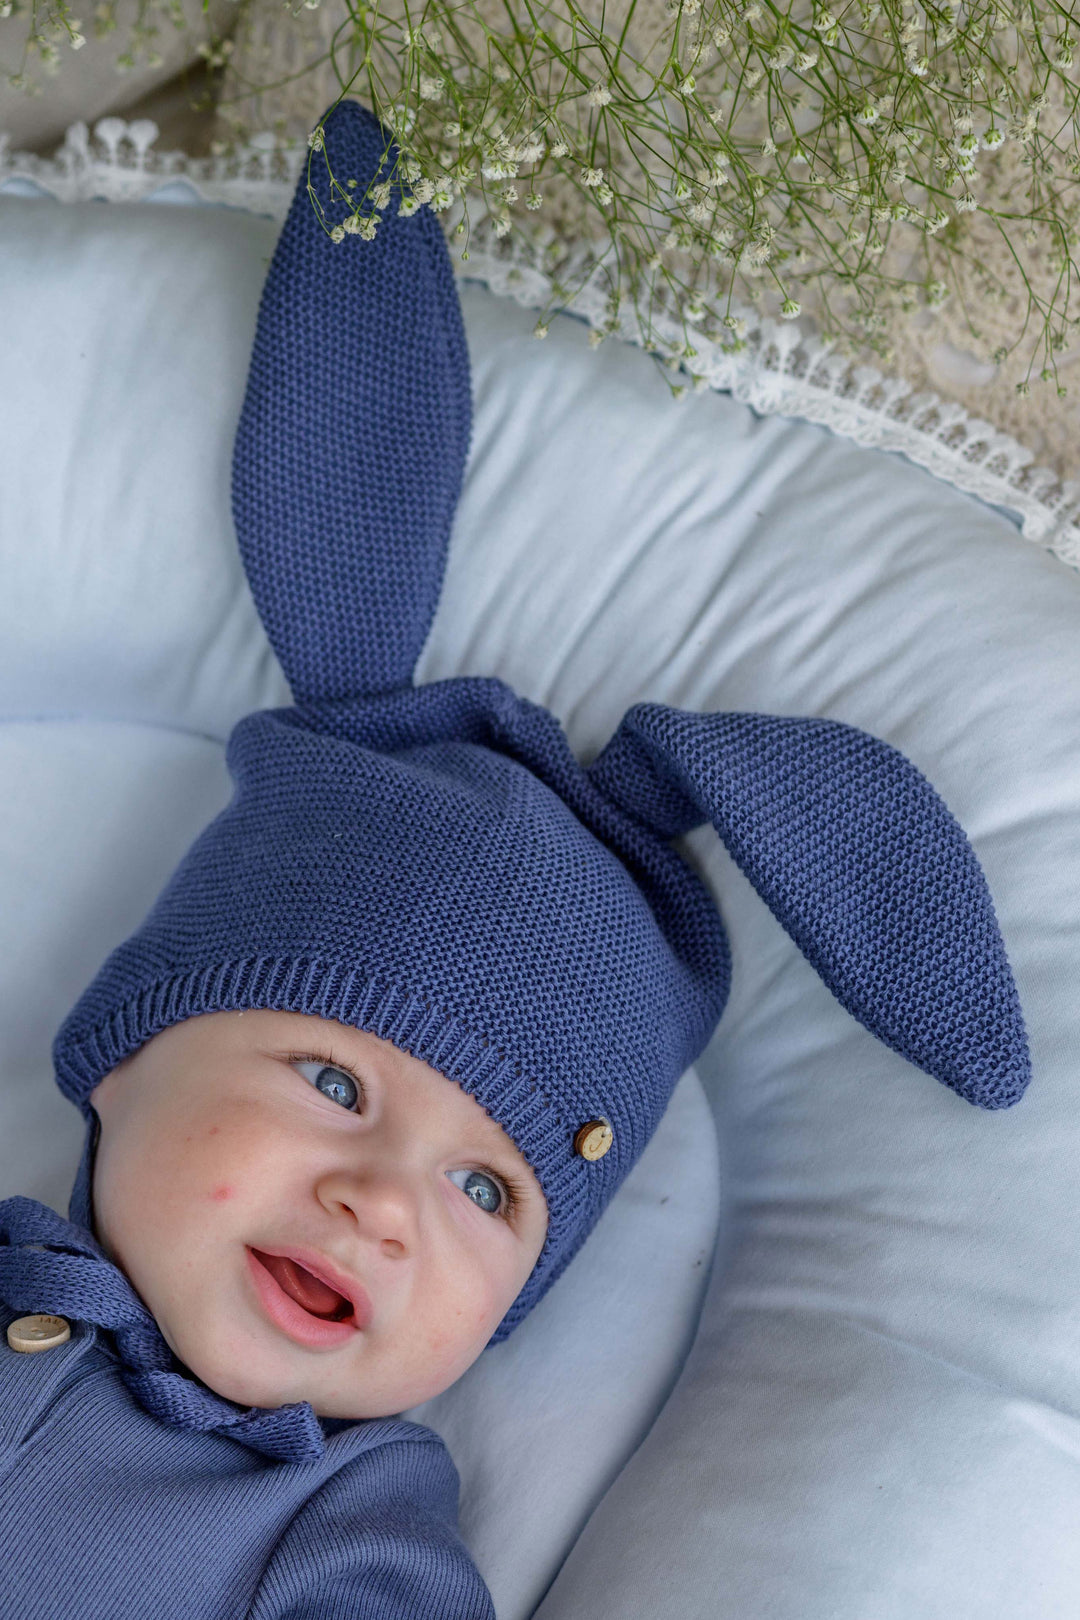 Jamiks "Bugs" Denim Blue Knit Bunny Hat | iphoneandroidapplications